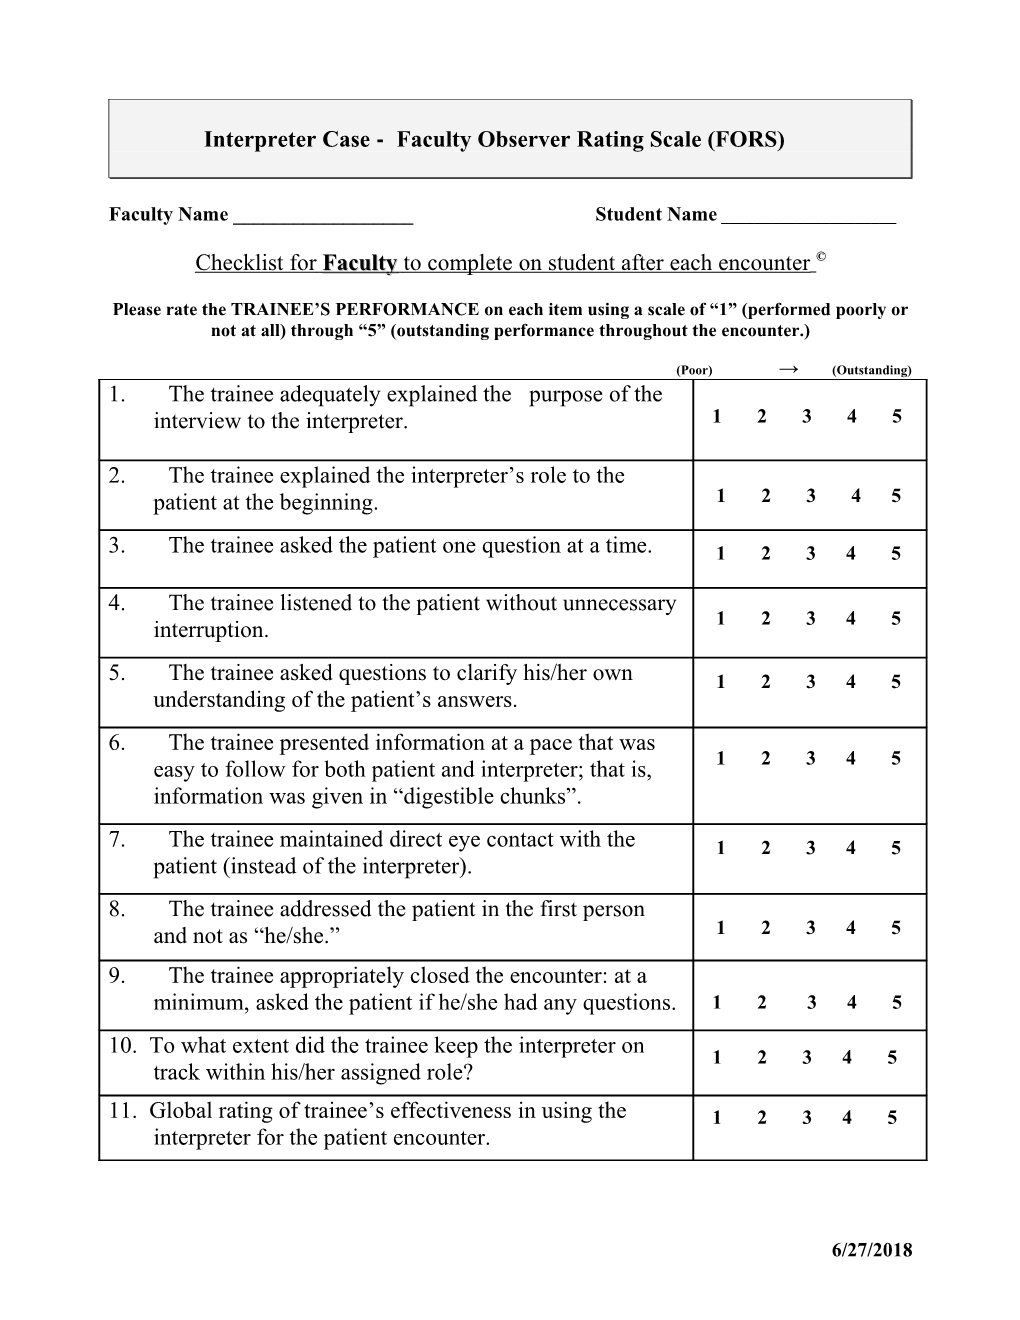 Interpreter Case - Faculty Observer Rating Scale (FORS)